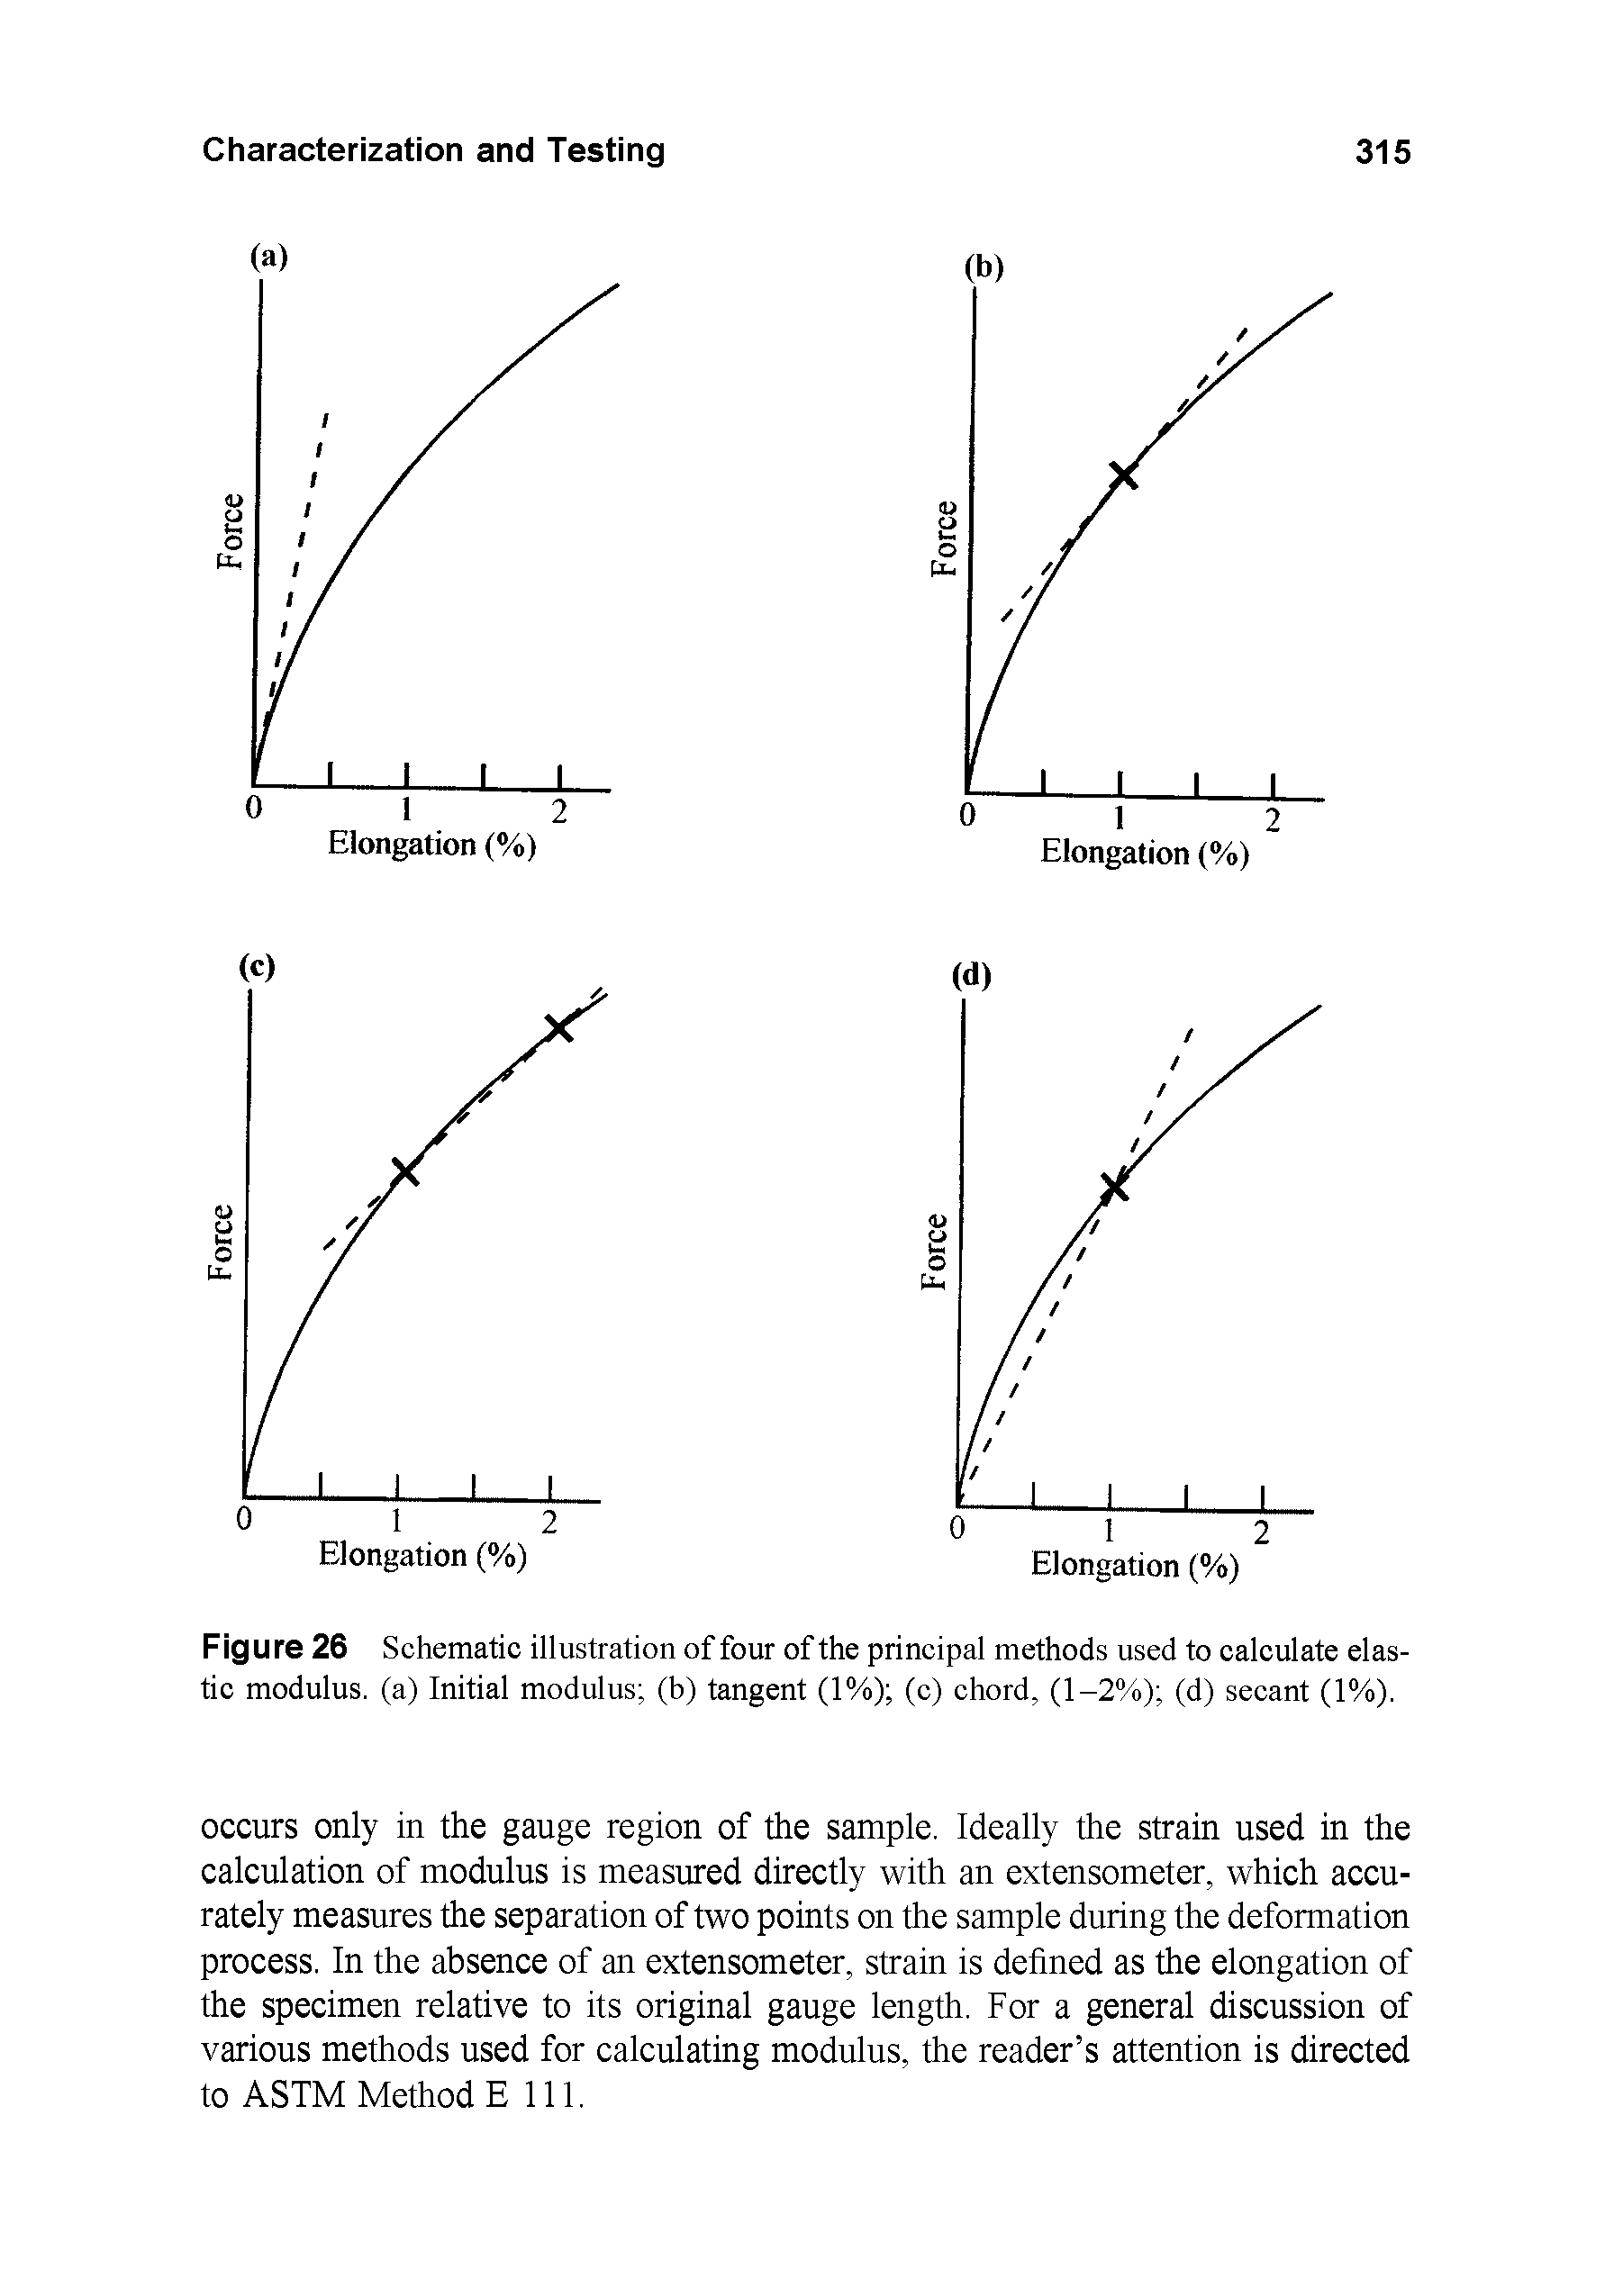 Figure 26 Schematic illustration of four of the principal methods used to ealeulate elastic modulus, (a) Initial modulus (b) tangent (1%) (c) chord, (1-2%) (d) secant (1%).